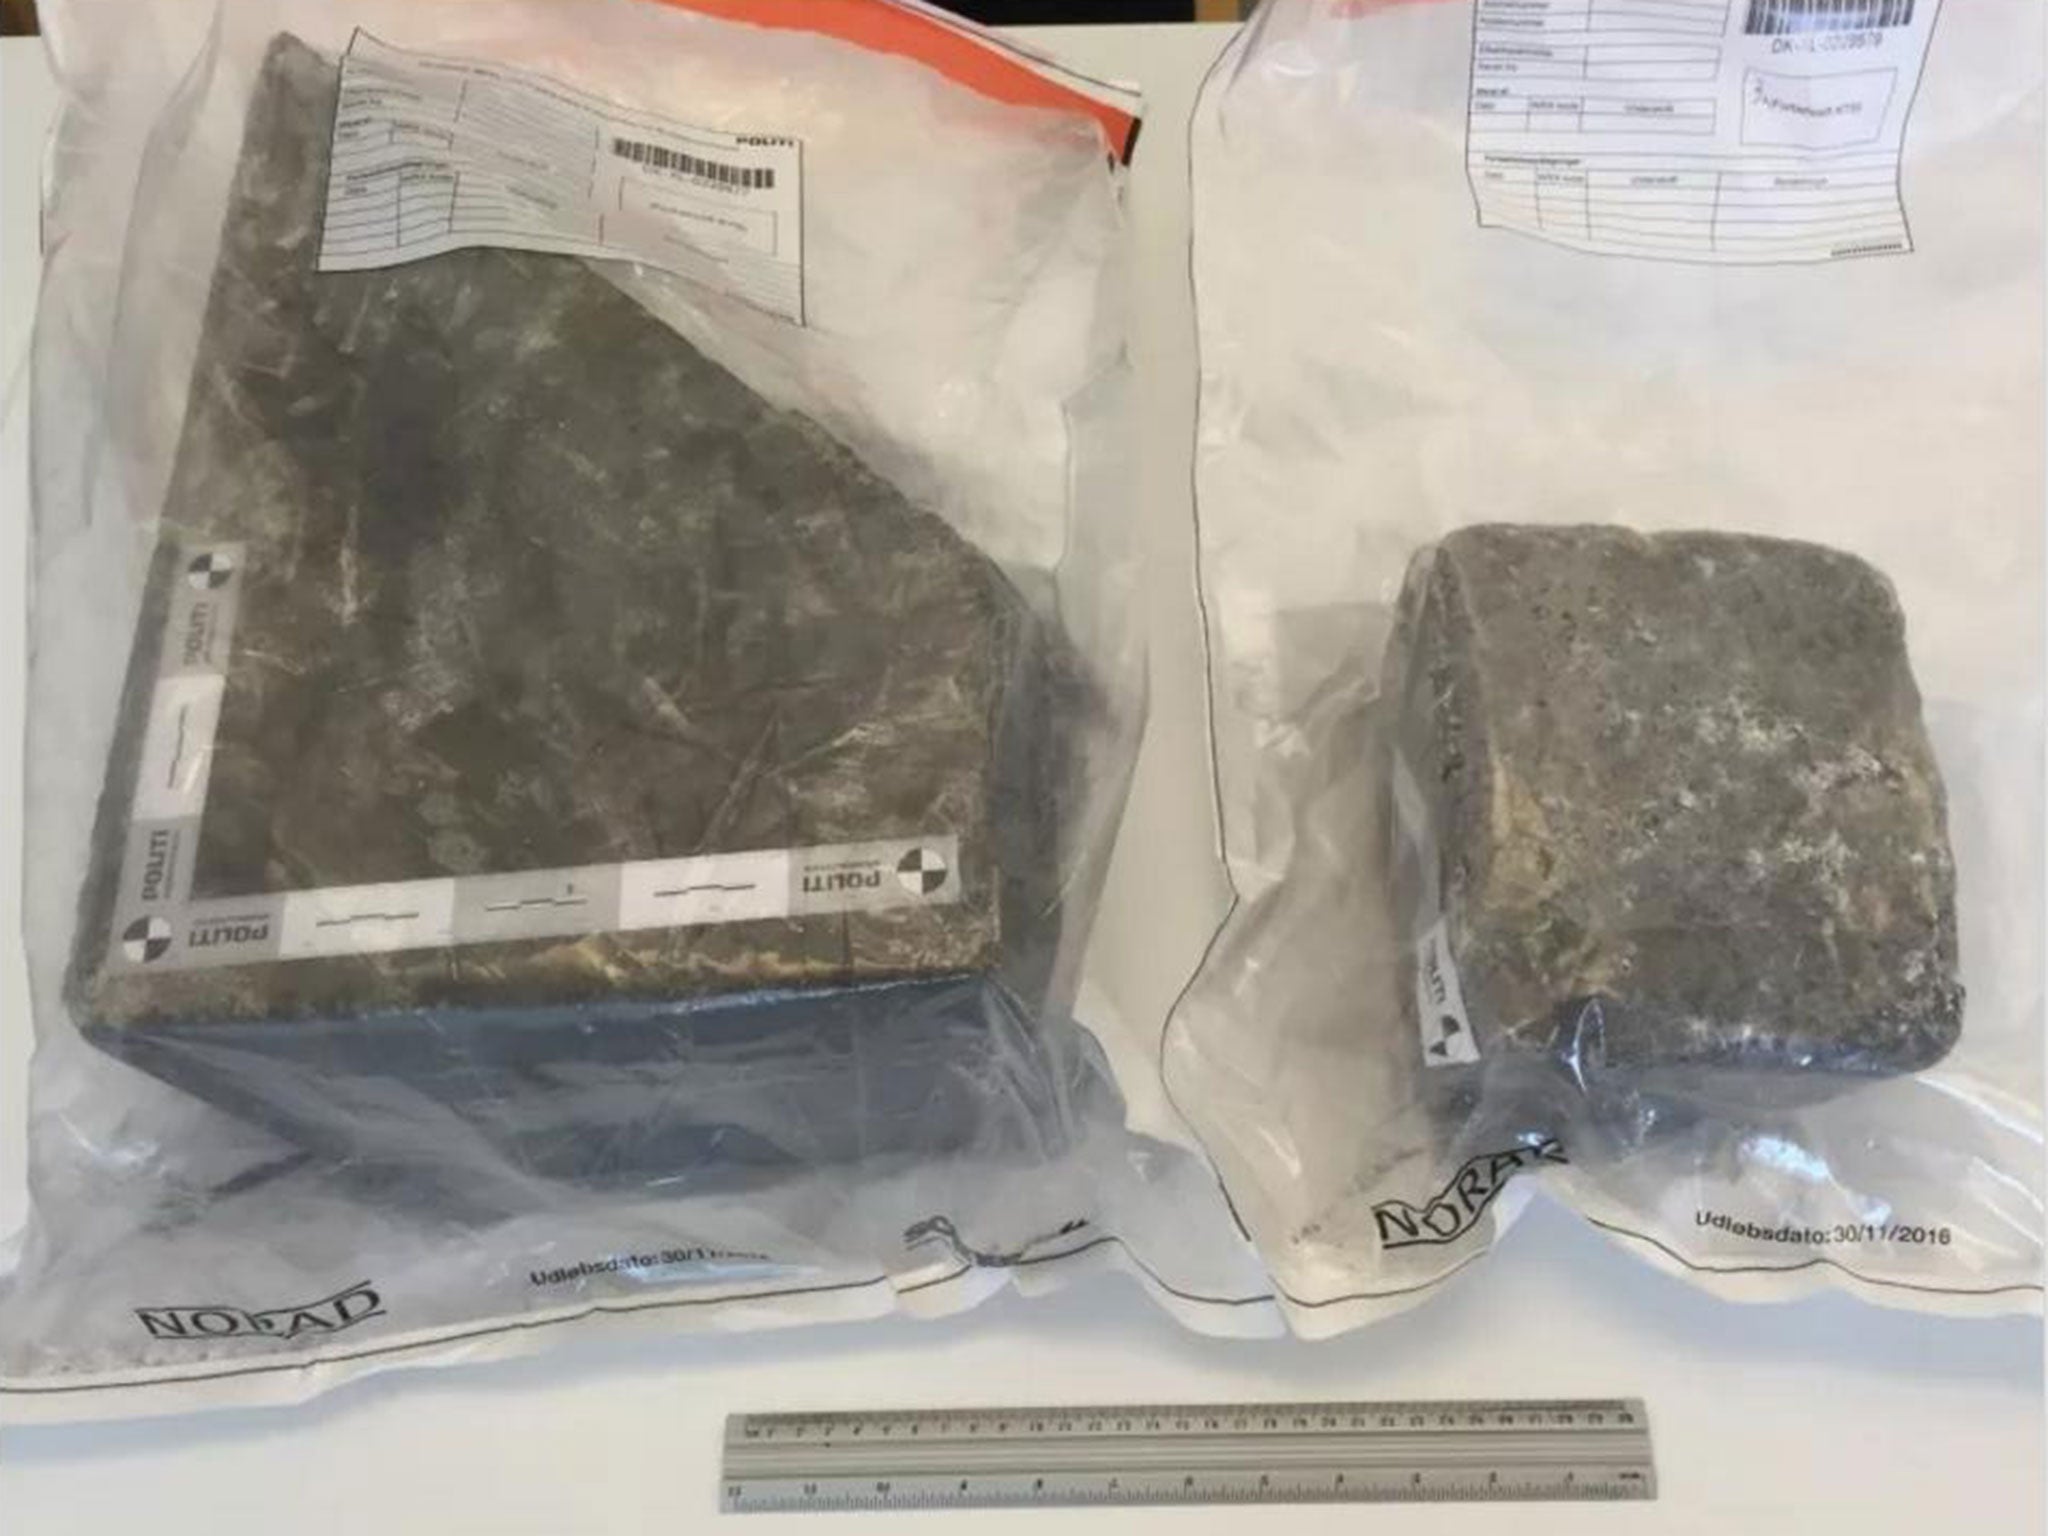 The tile and cobblestone dropped on a car carrying German tourists through Denmark on 21 August